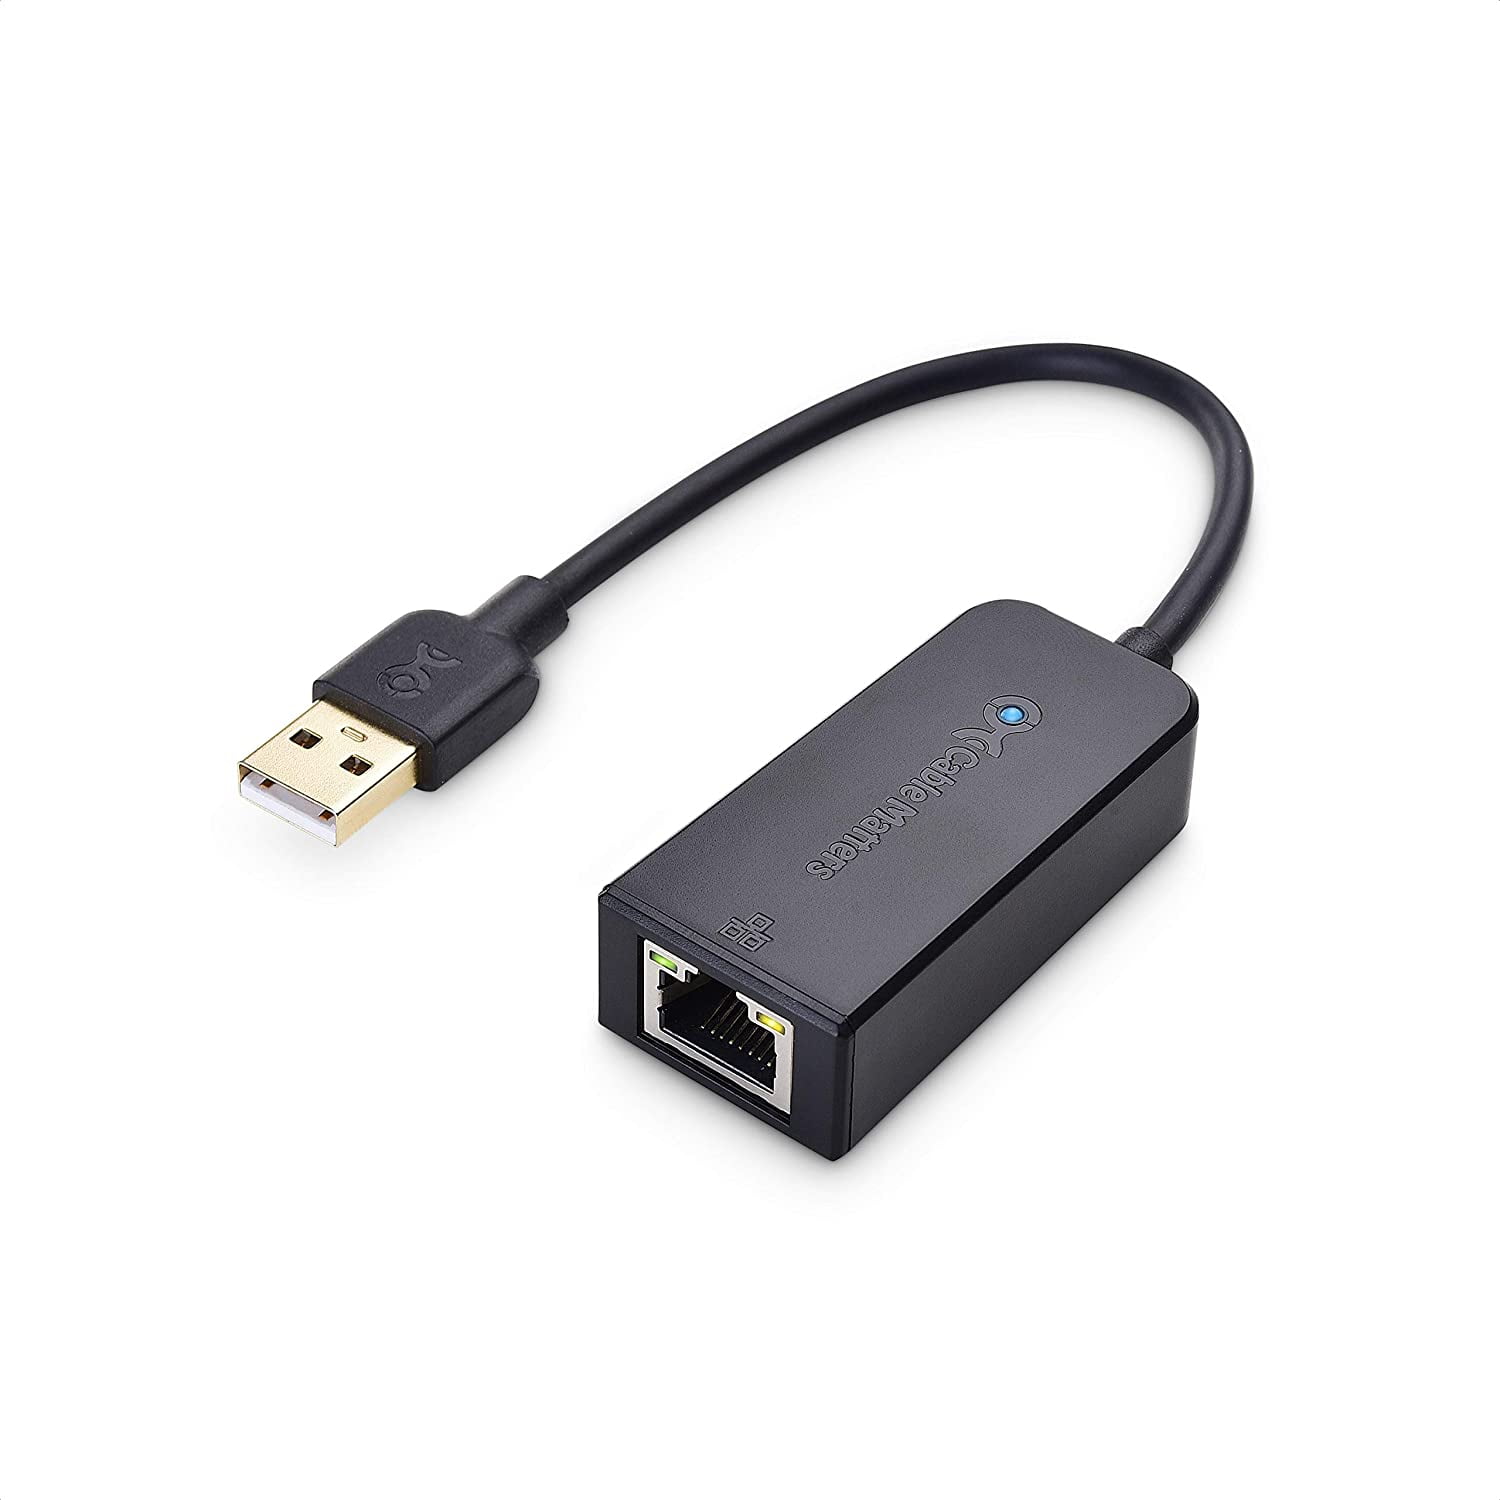 Cable Matters Gigabit USB Ethernet Adapter for Game Console Laptop (USB 3.0 10/100/1000 Mbps Ethernet Adapter) - Walmart.com